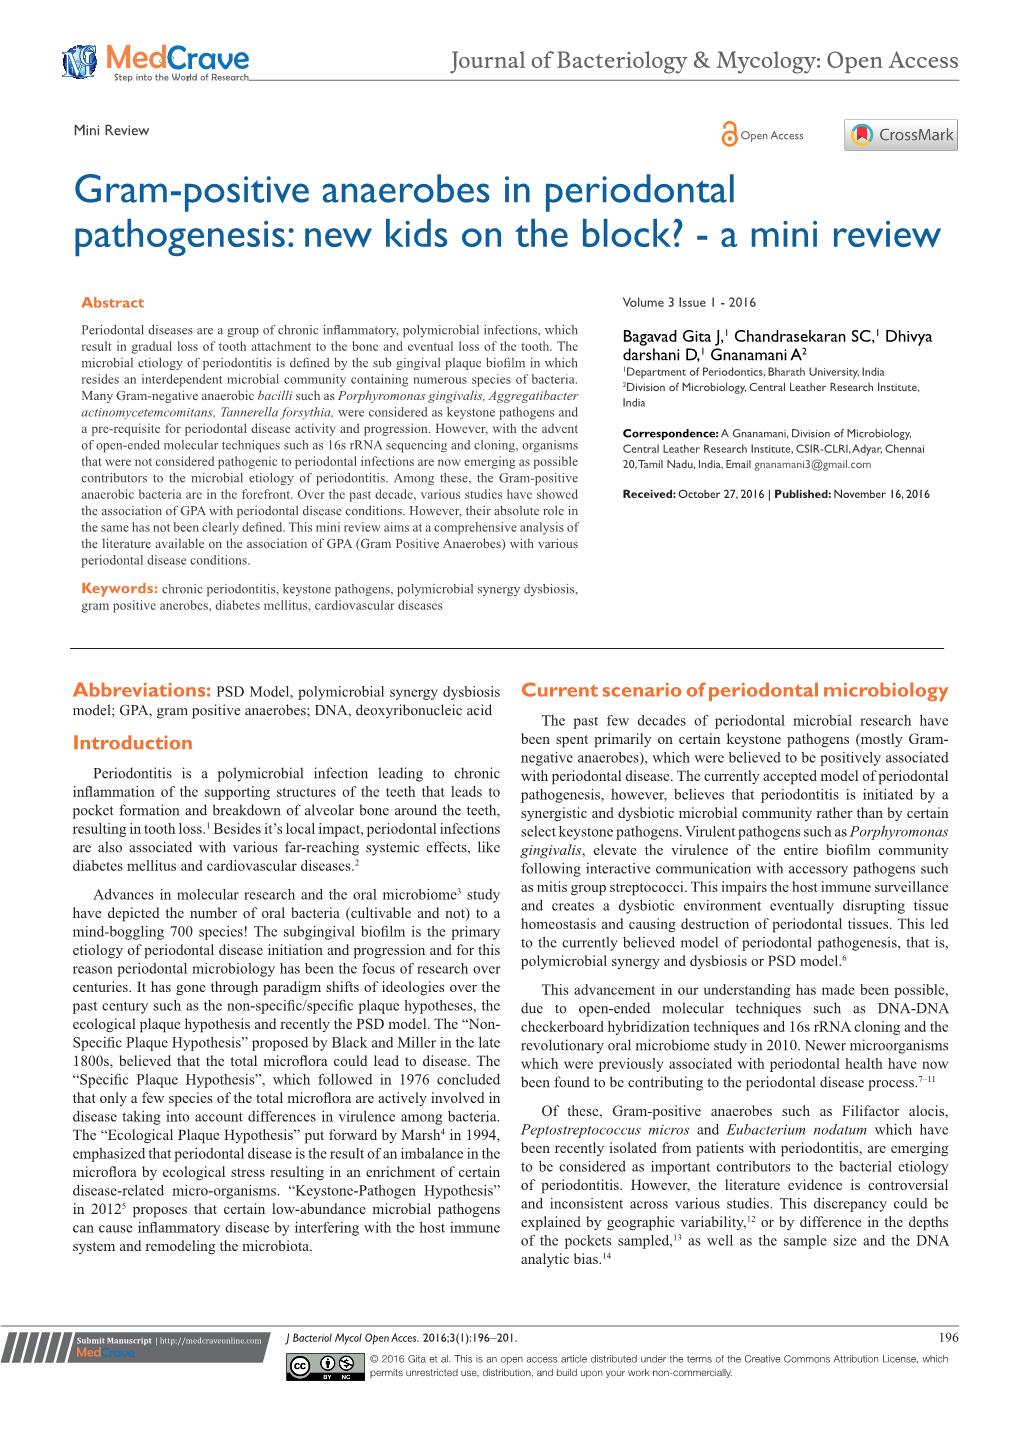 Gram-Positive Anaerobes in Periodontal Pathogenesis: New Kids on the Block? - a Mini Review